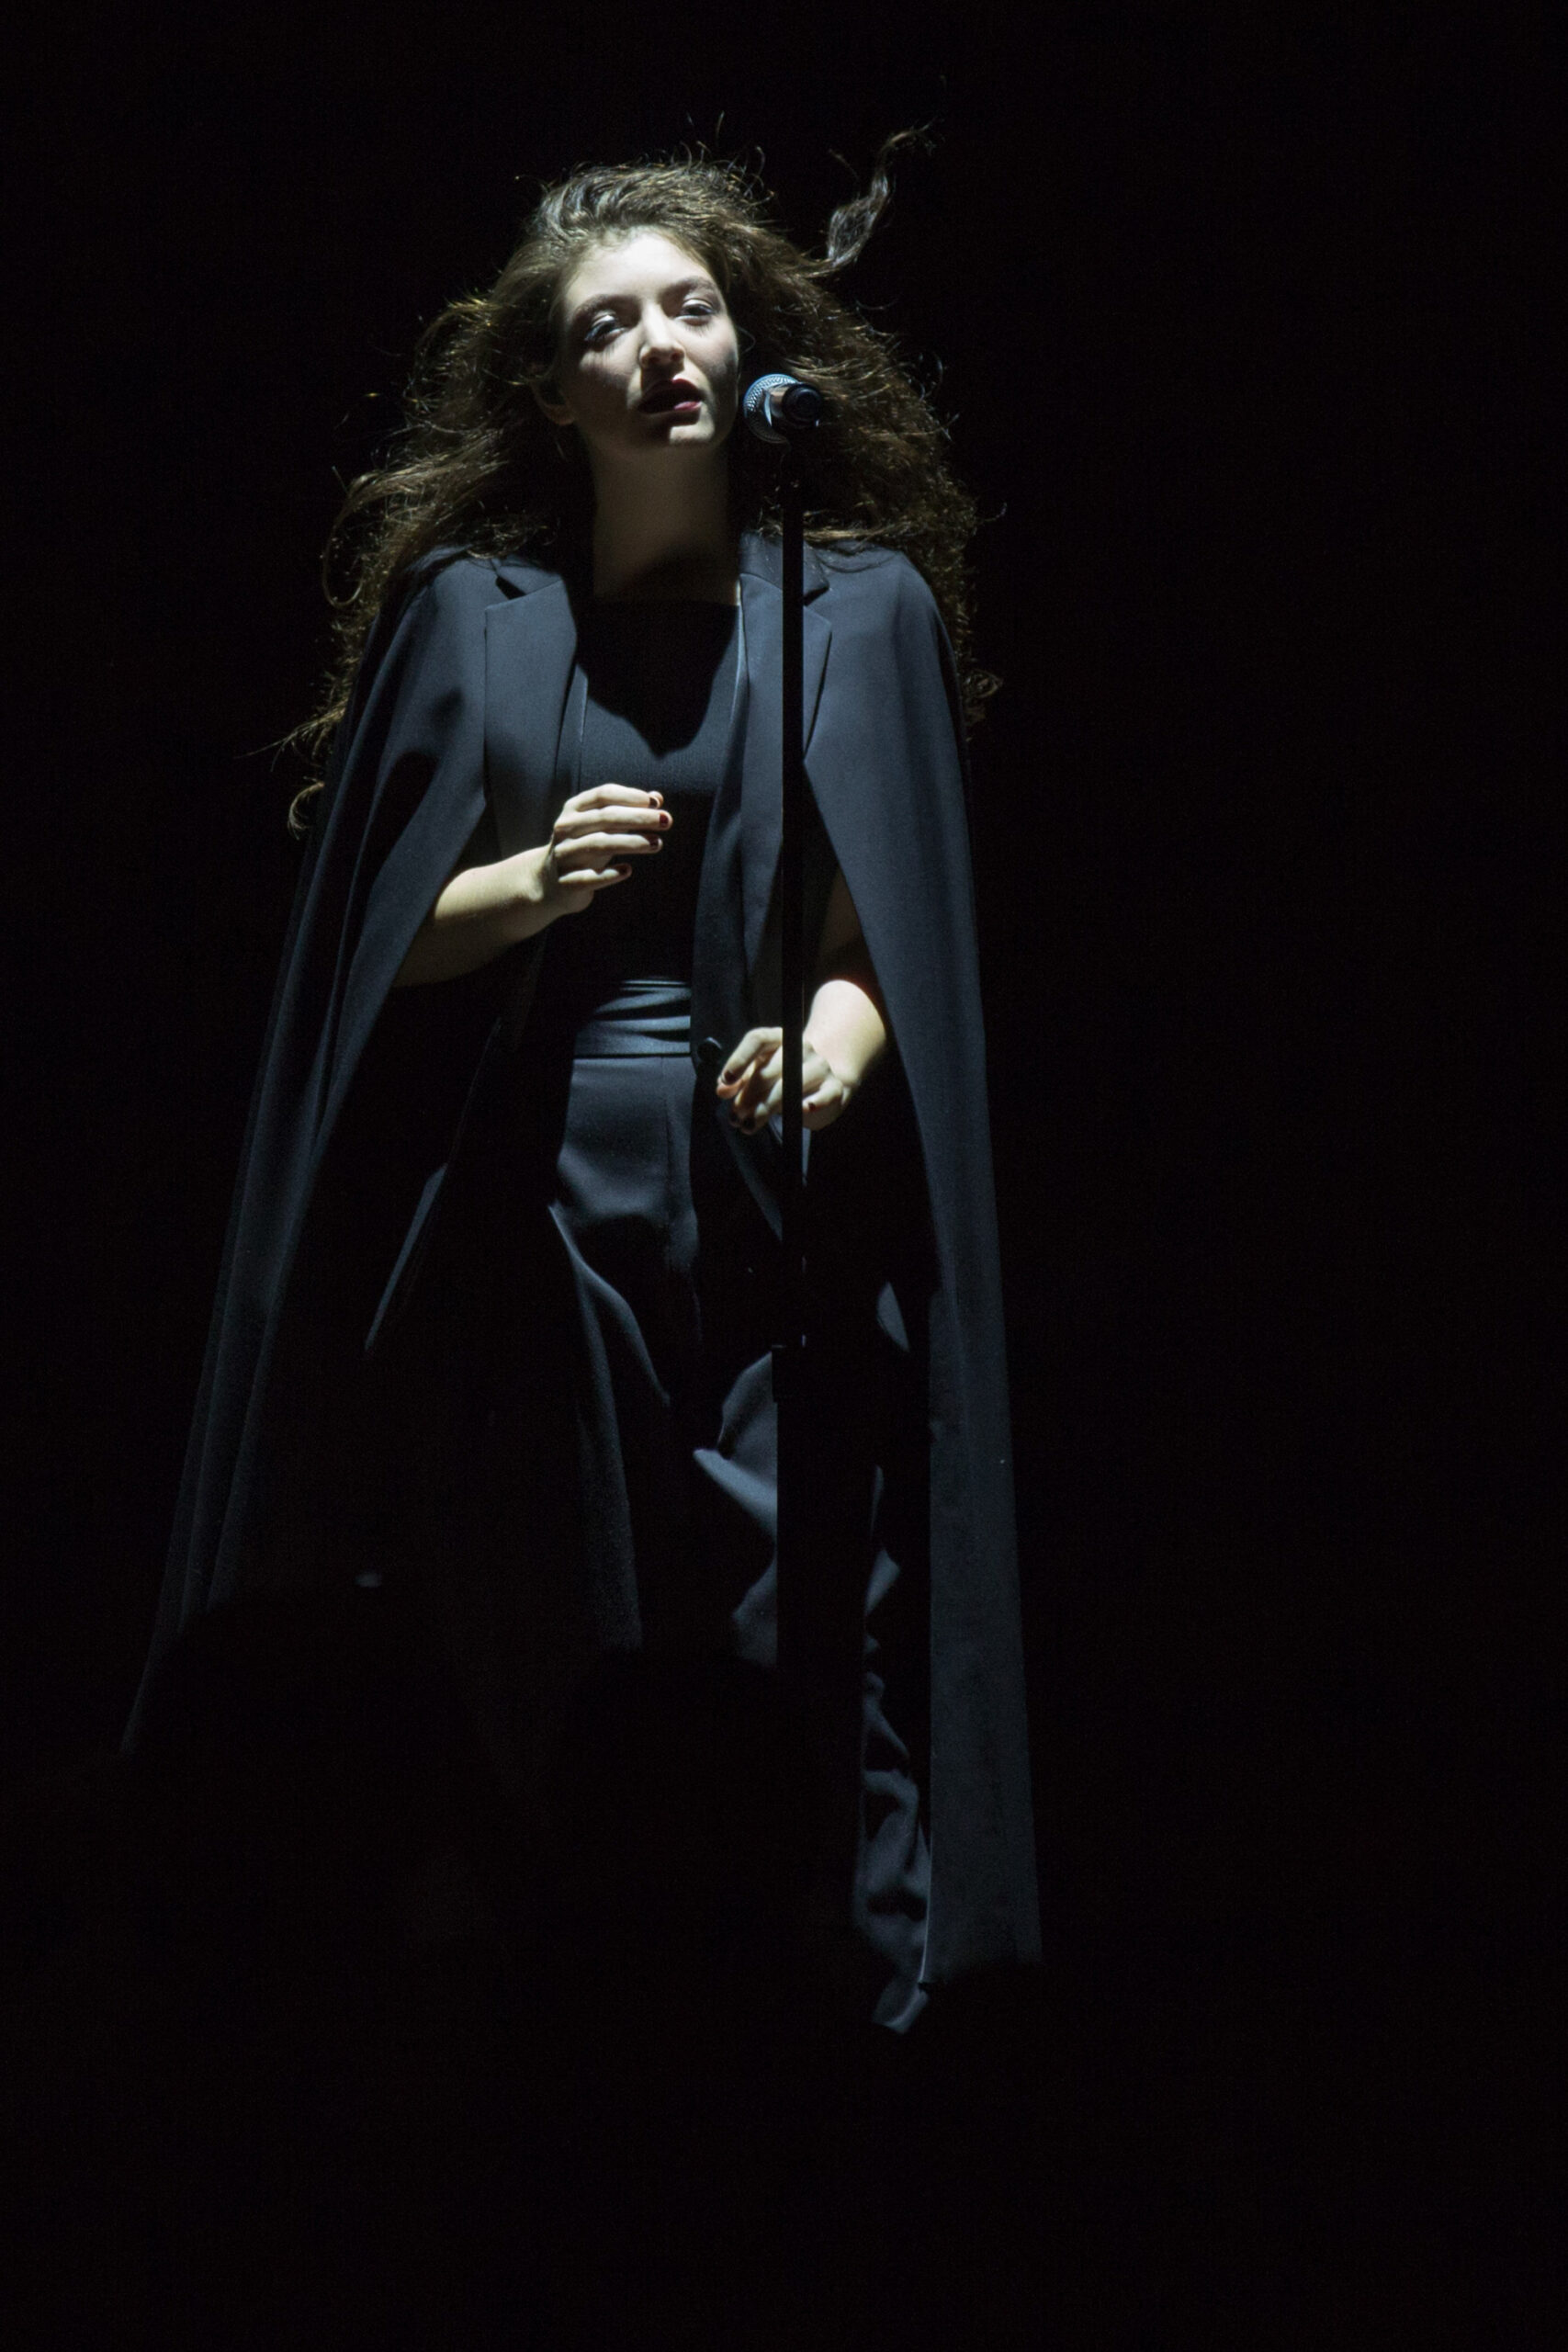 Singer Lorde sings and wears a black cloak and black "suit" with a single spotlight shining on her face.